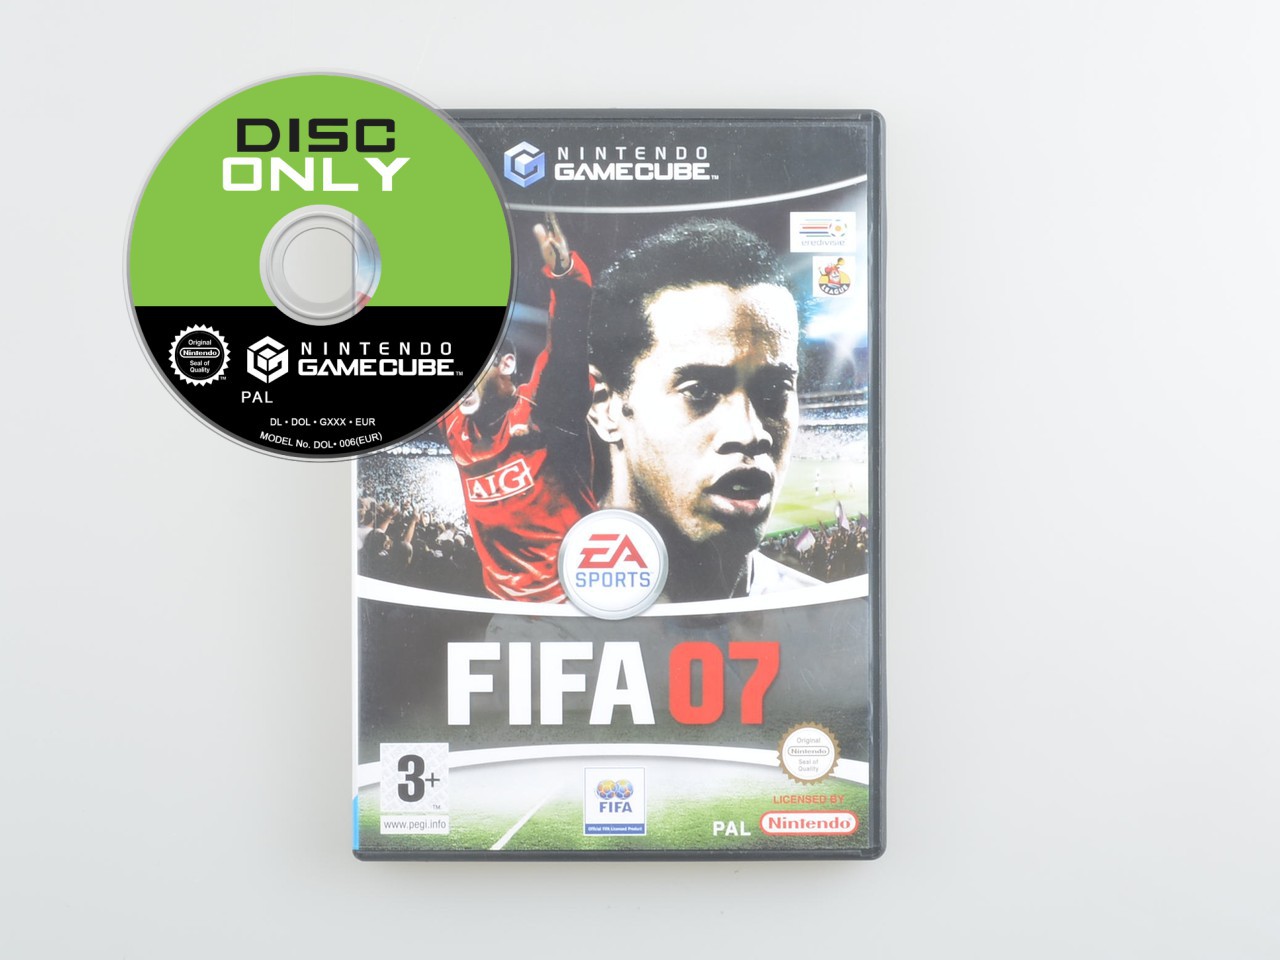 FIFA 07 - Disc Only - Gamecube Games